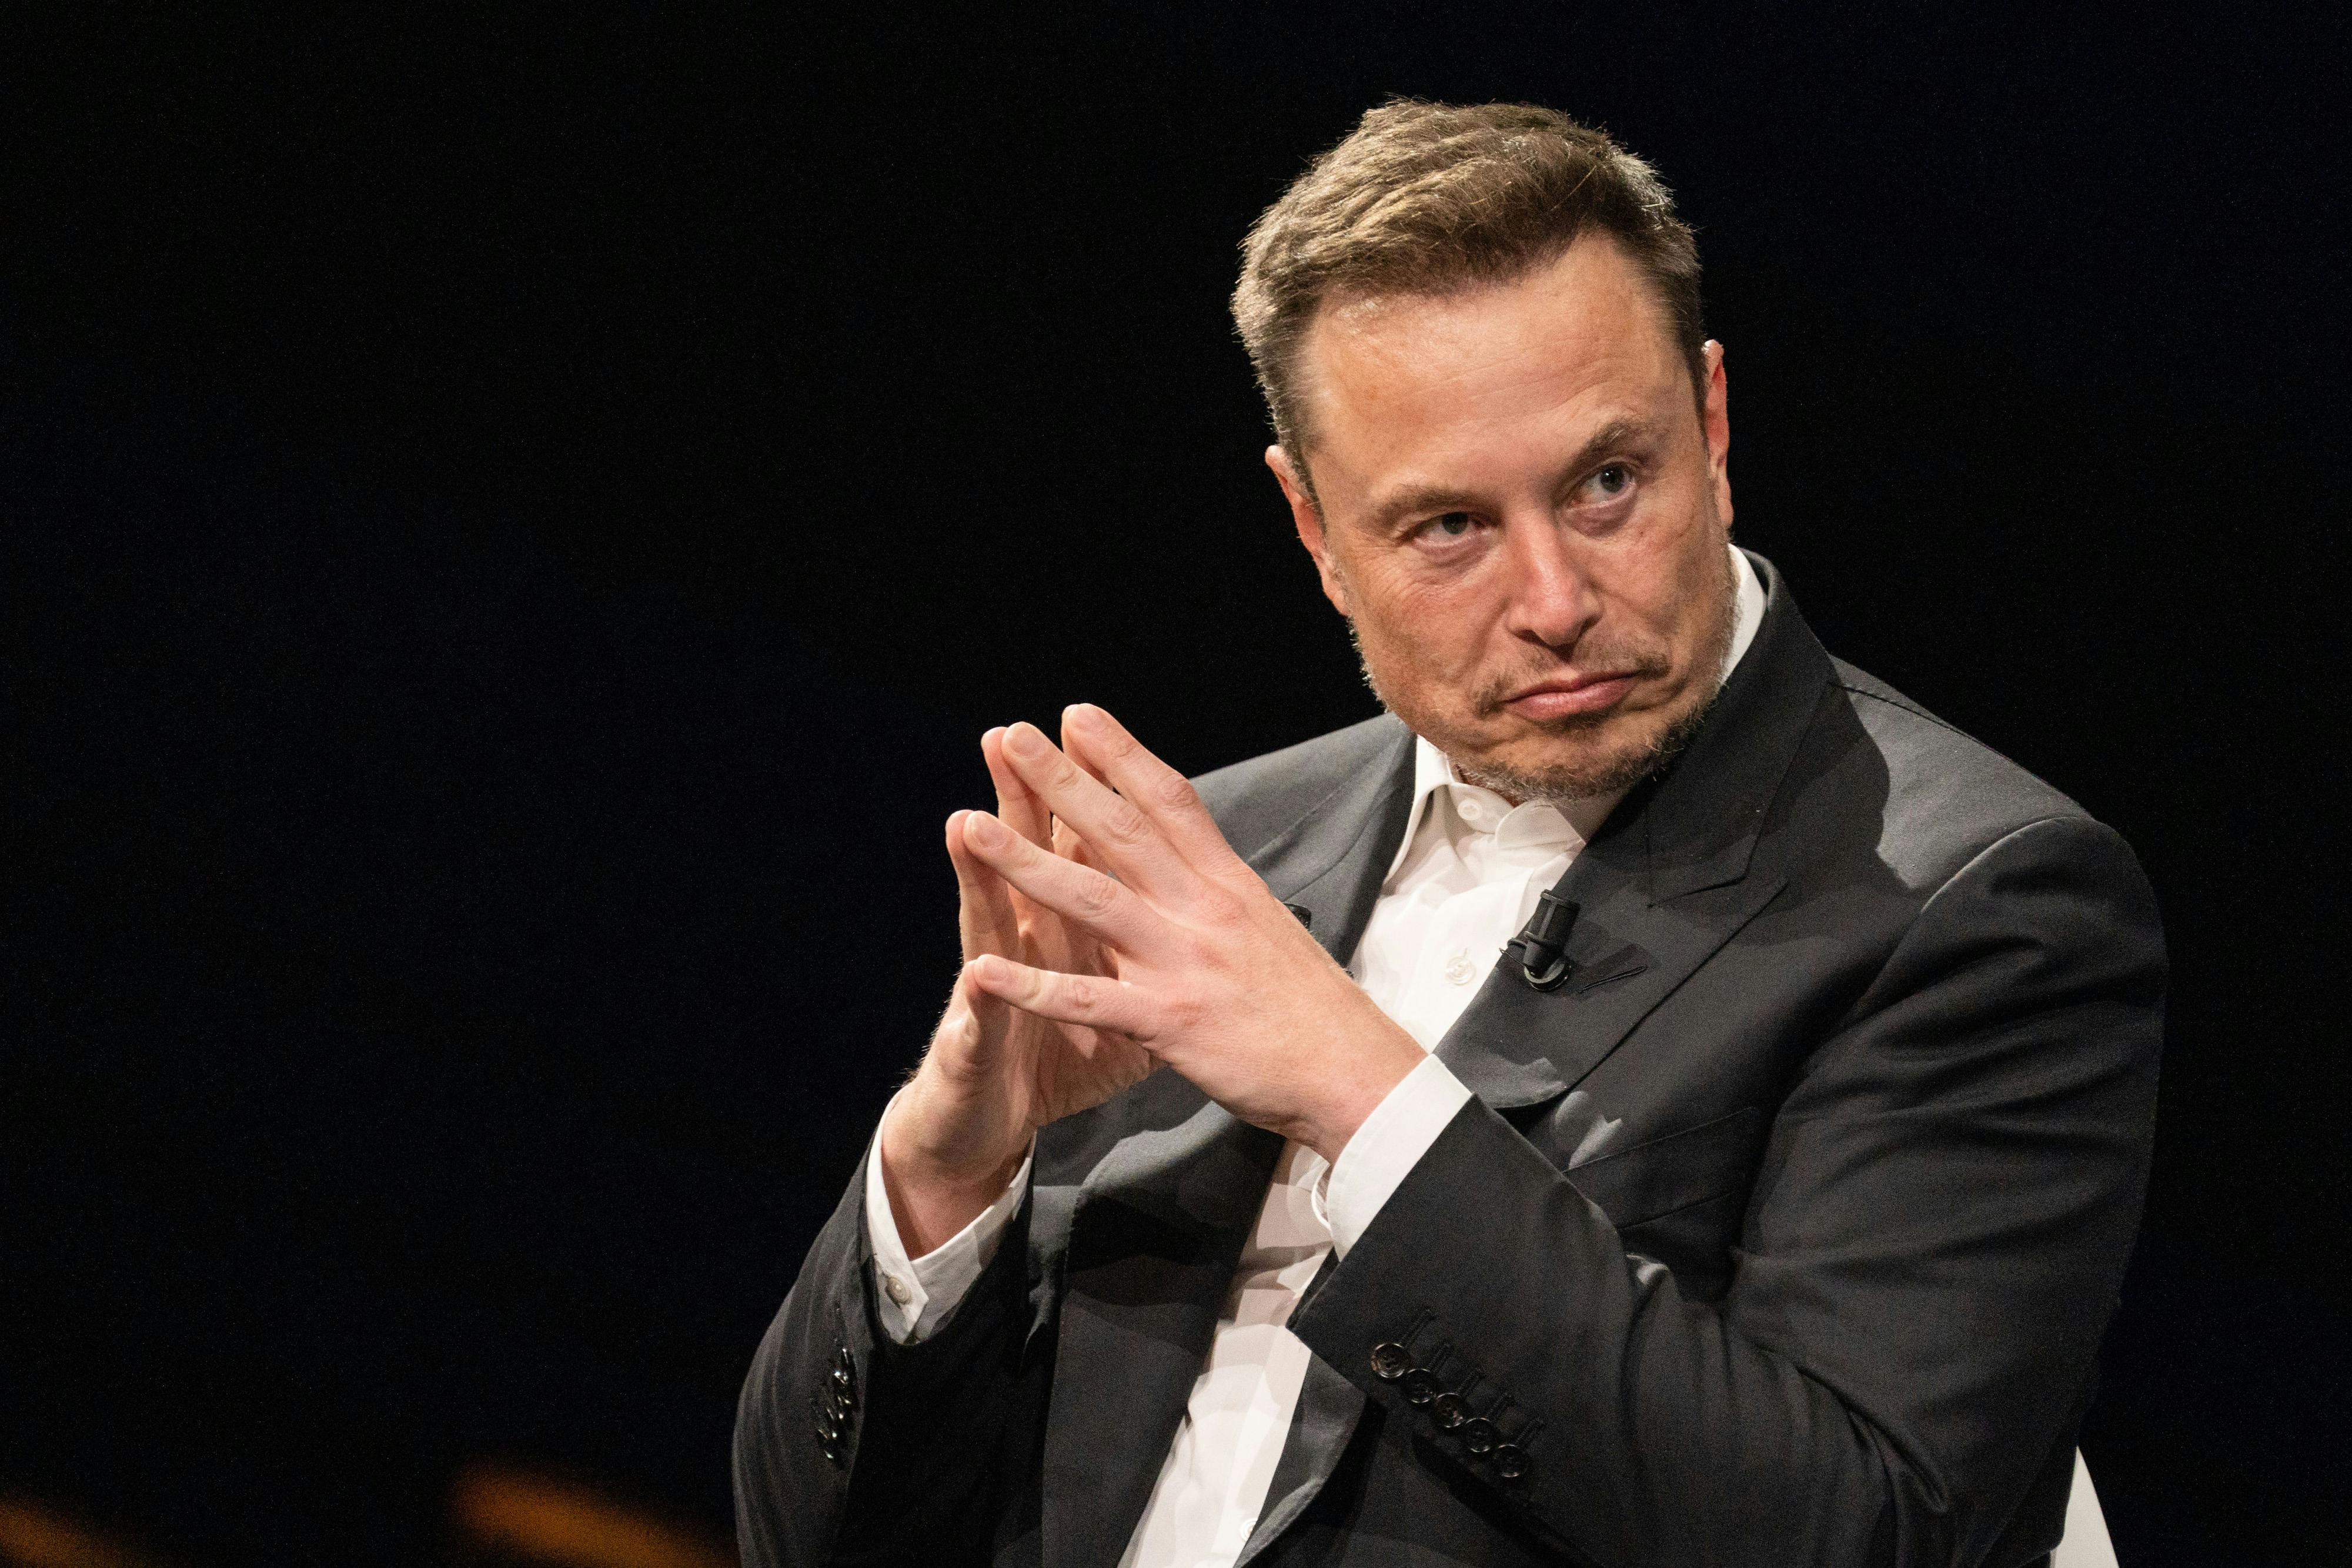 Report: Elon Musk Has Been Chatting Up Putin While Aiding Ukraine | The New Republic